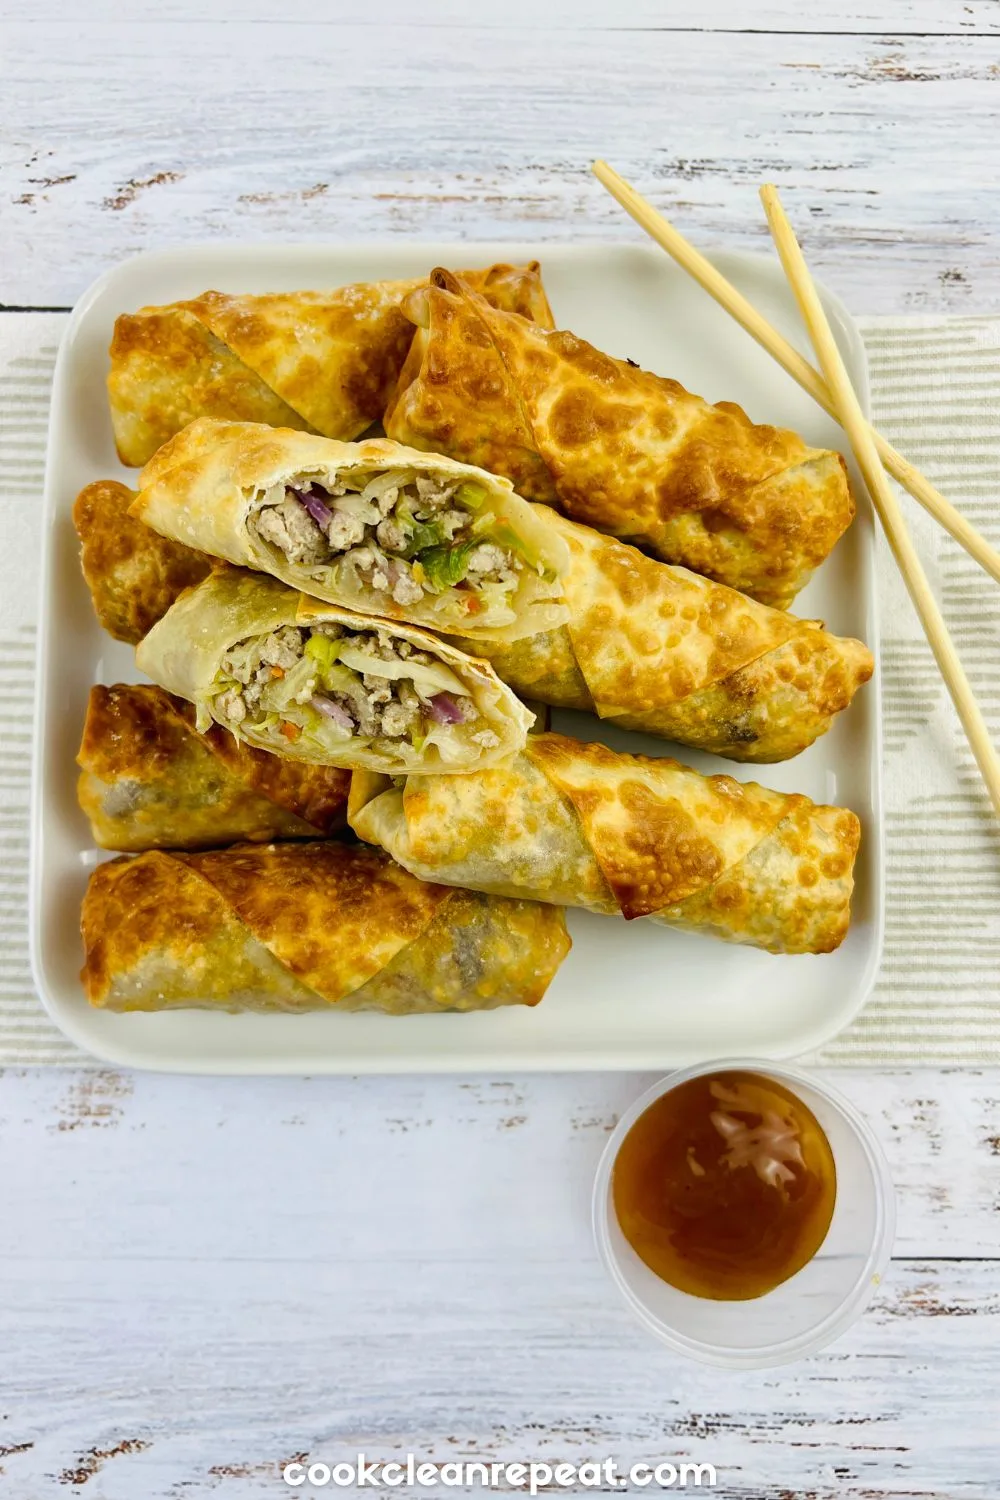 egg rolls on a plate with two of them positioned to see the ingredients inside